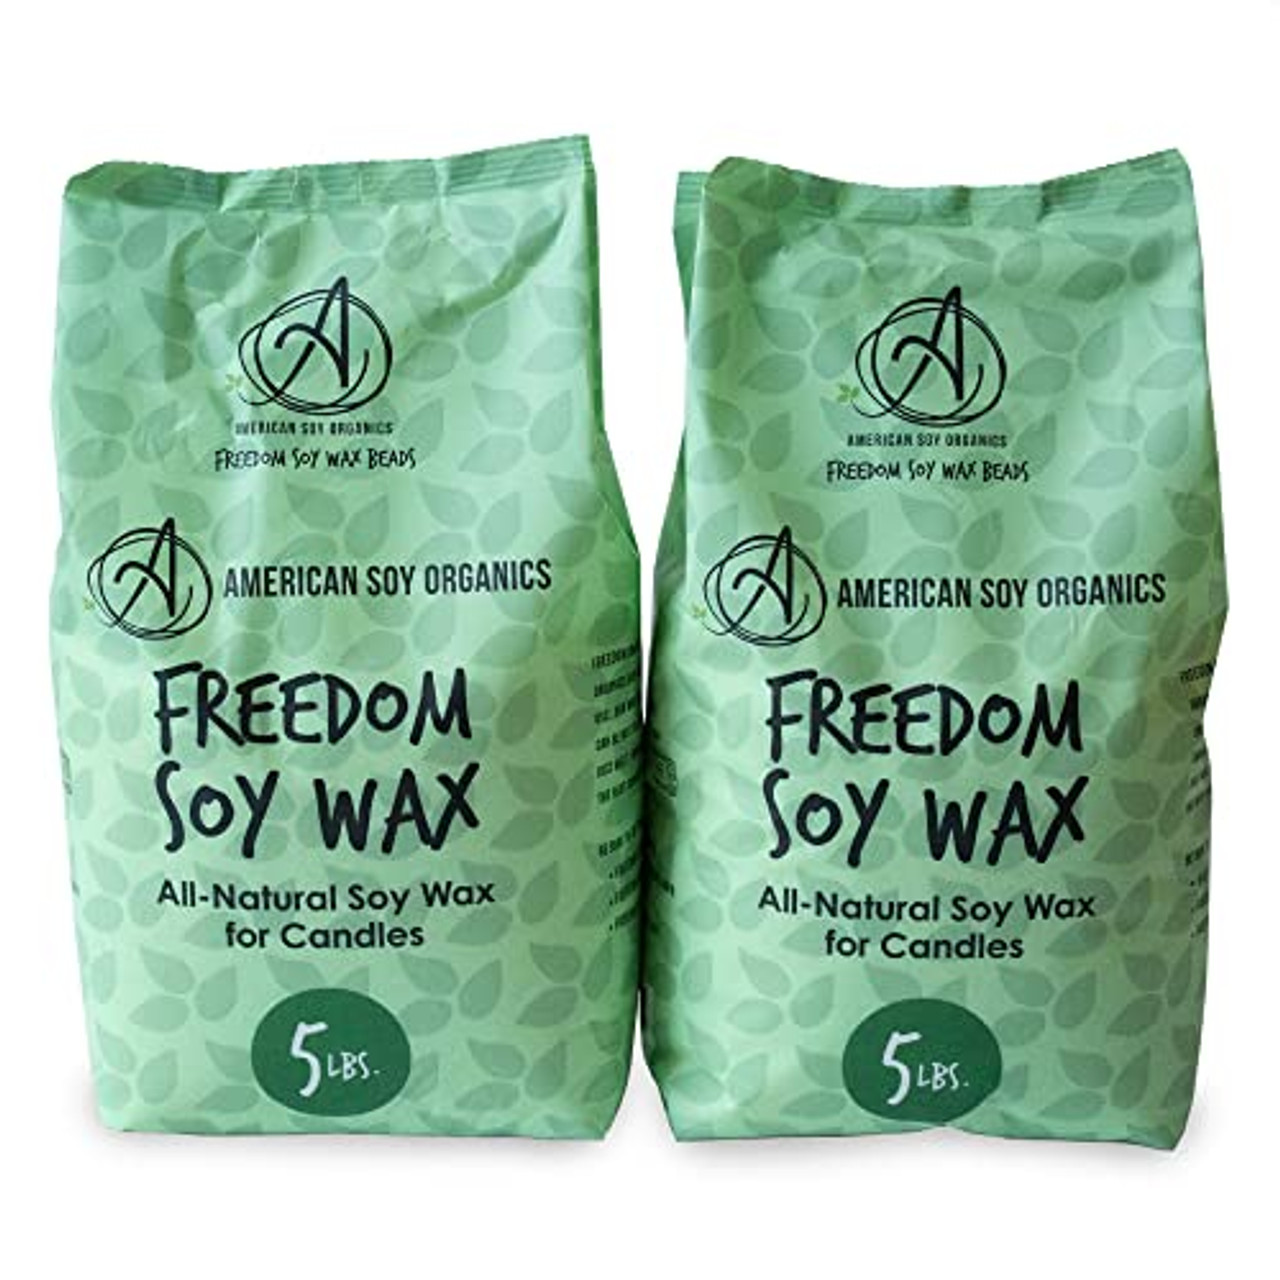 American Soy Organics- 10 lb of Freedom Soy Wax Beads for Candle